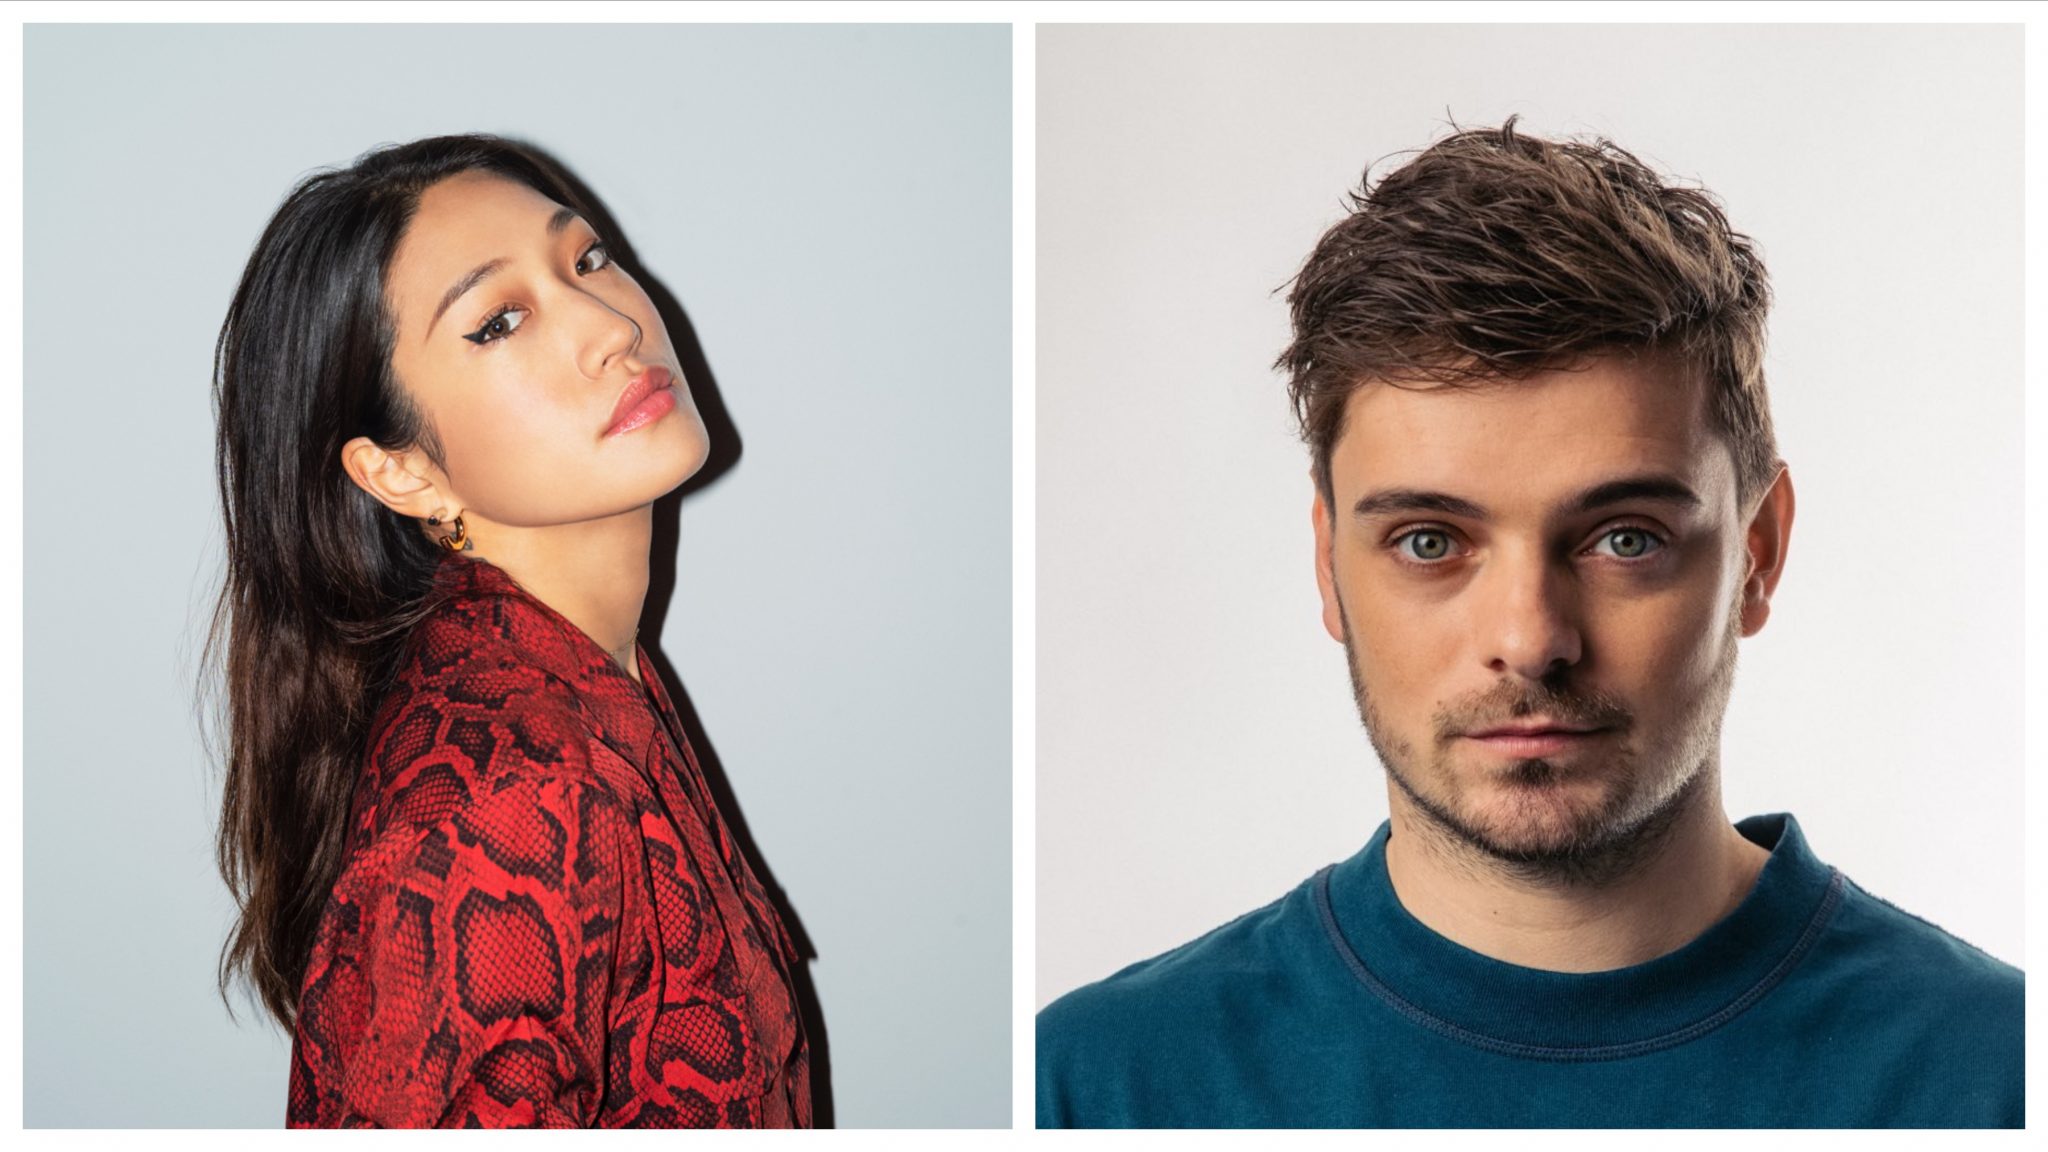 No Art Festival Announces Full Lineup With Headliners Peggy Gou